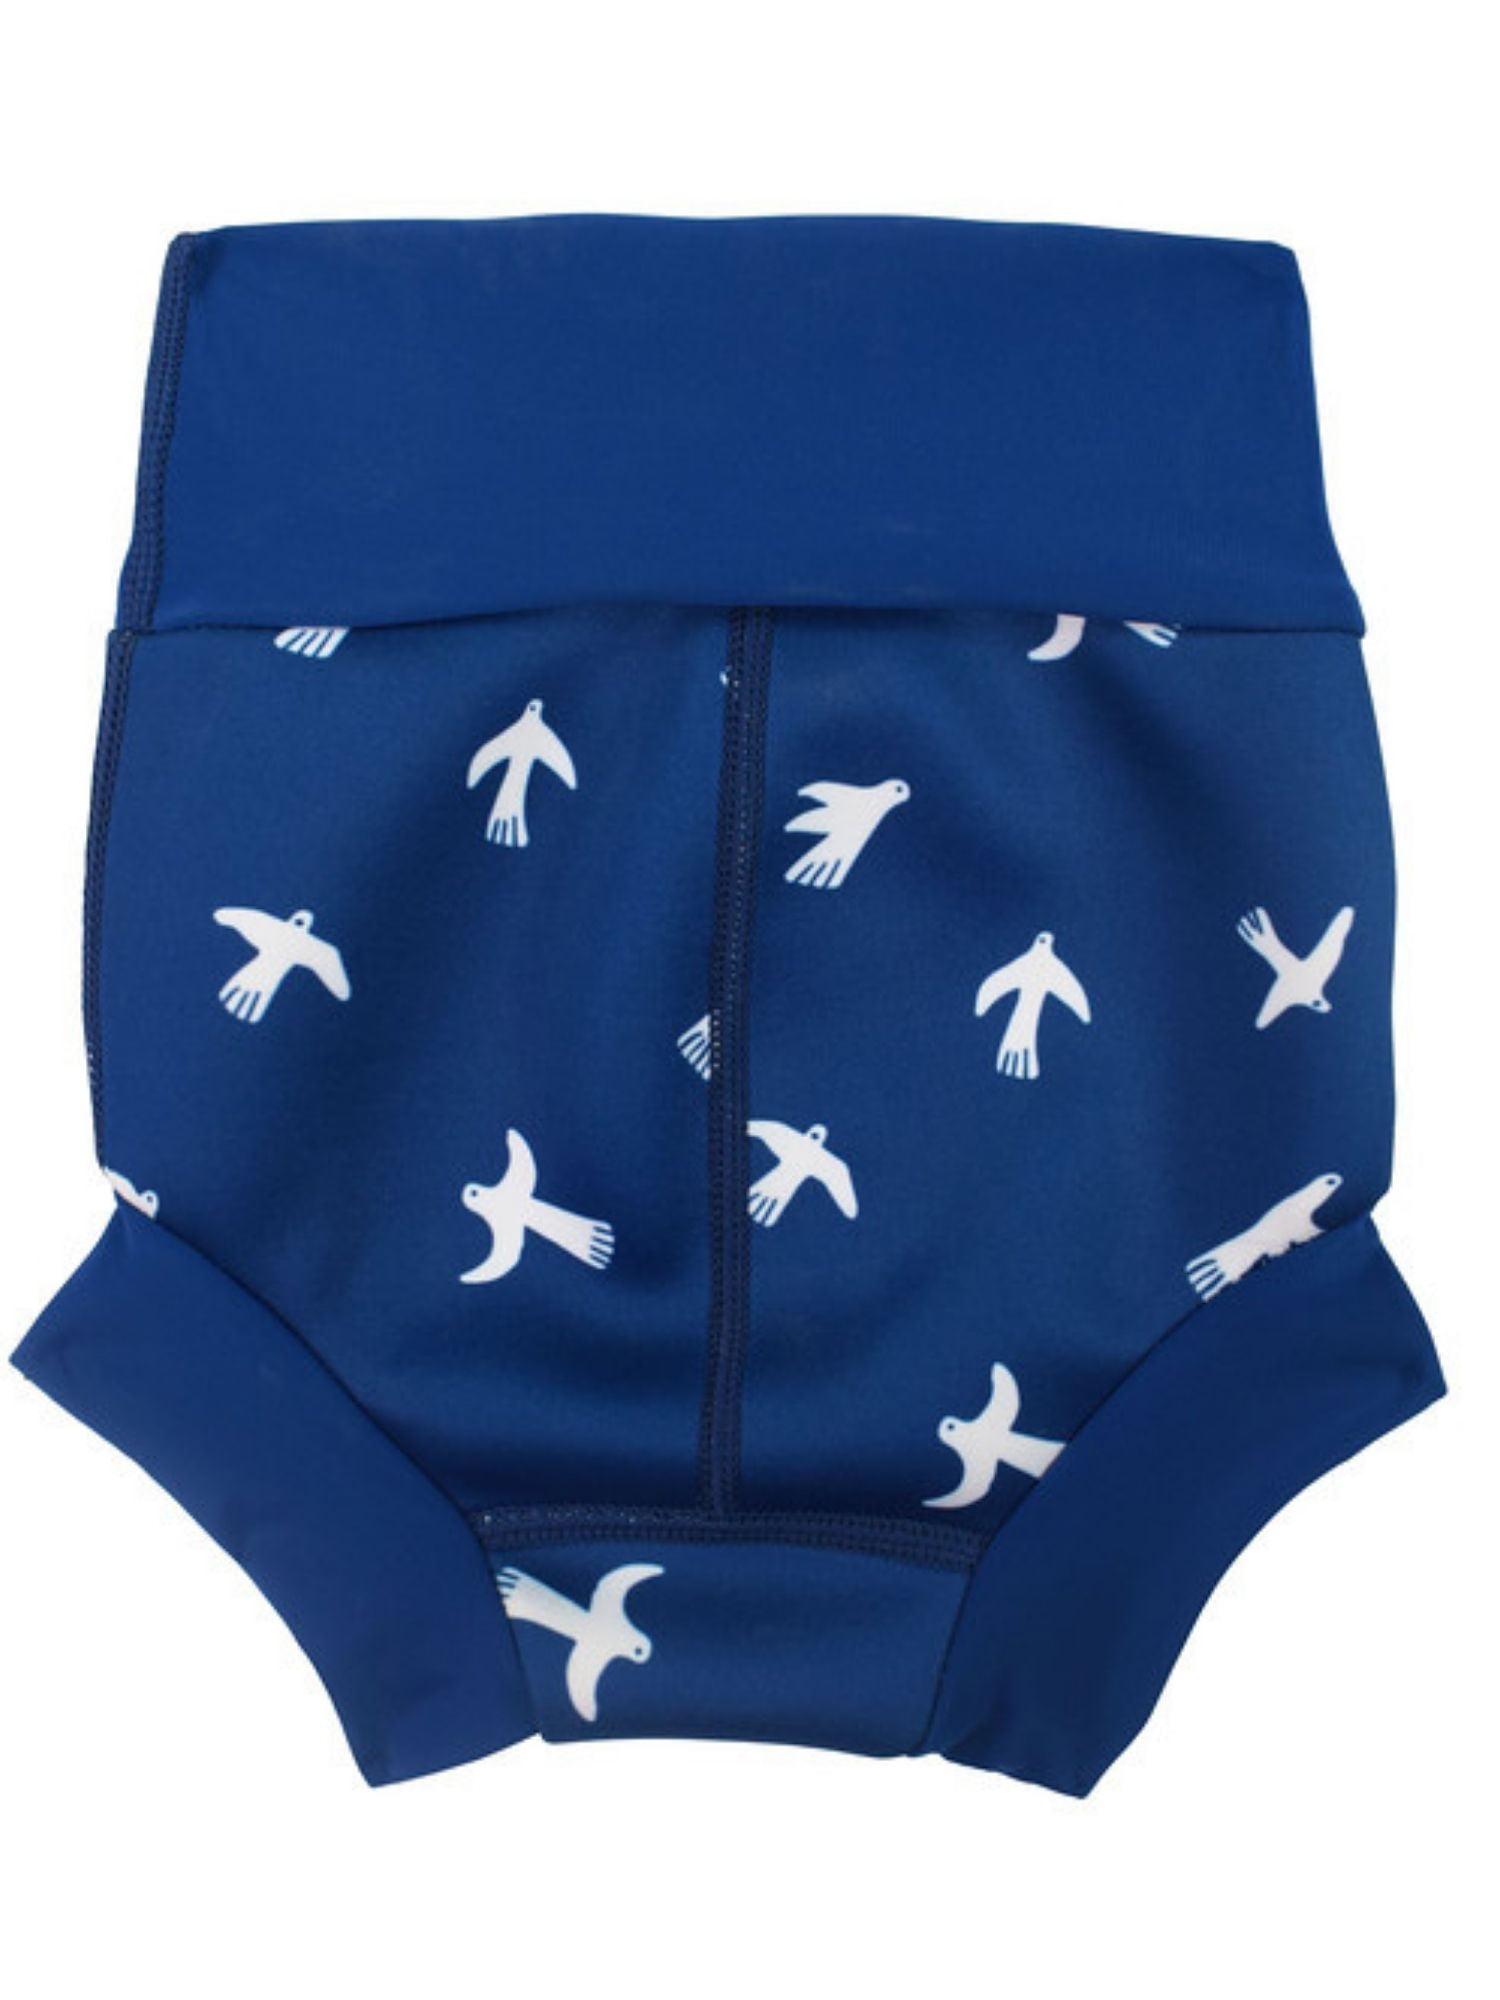 3-6 Months, Blue Cobalt Splash About New and Improved Happy Nappy Swim Diaper 